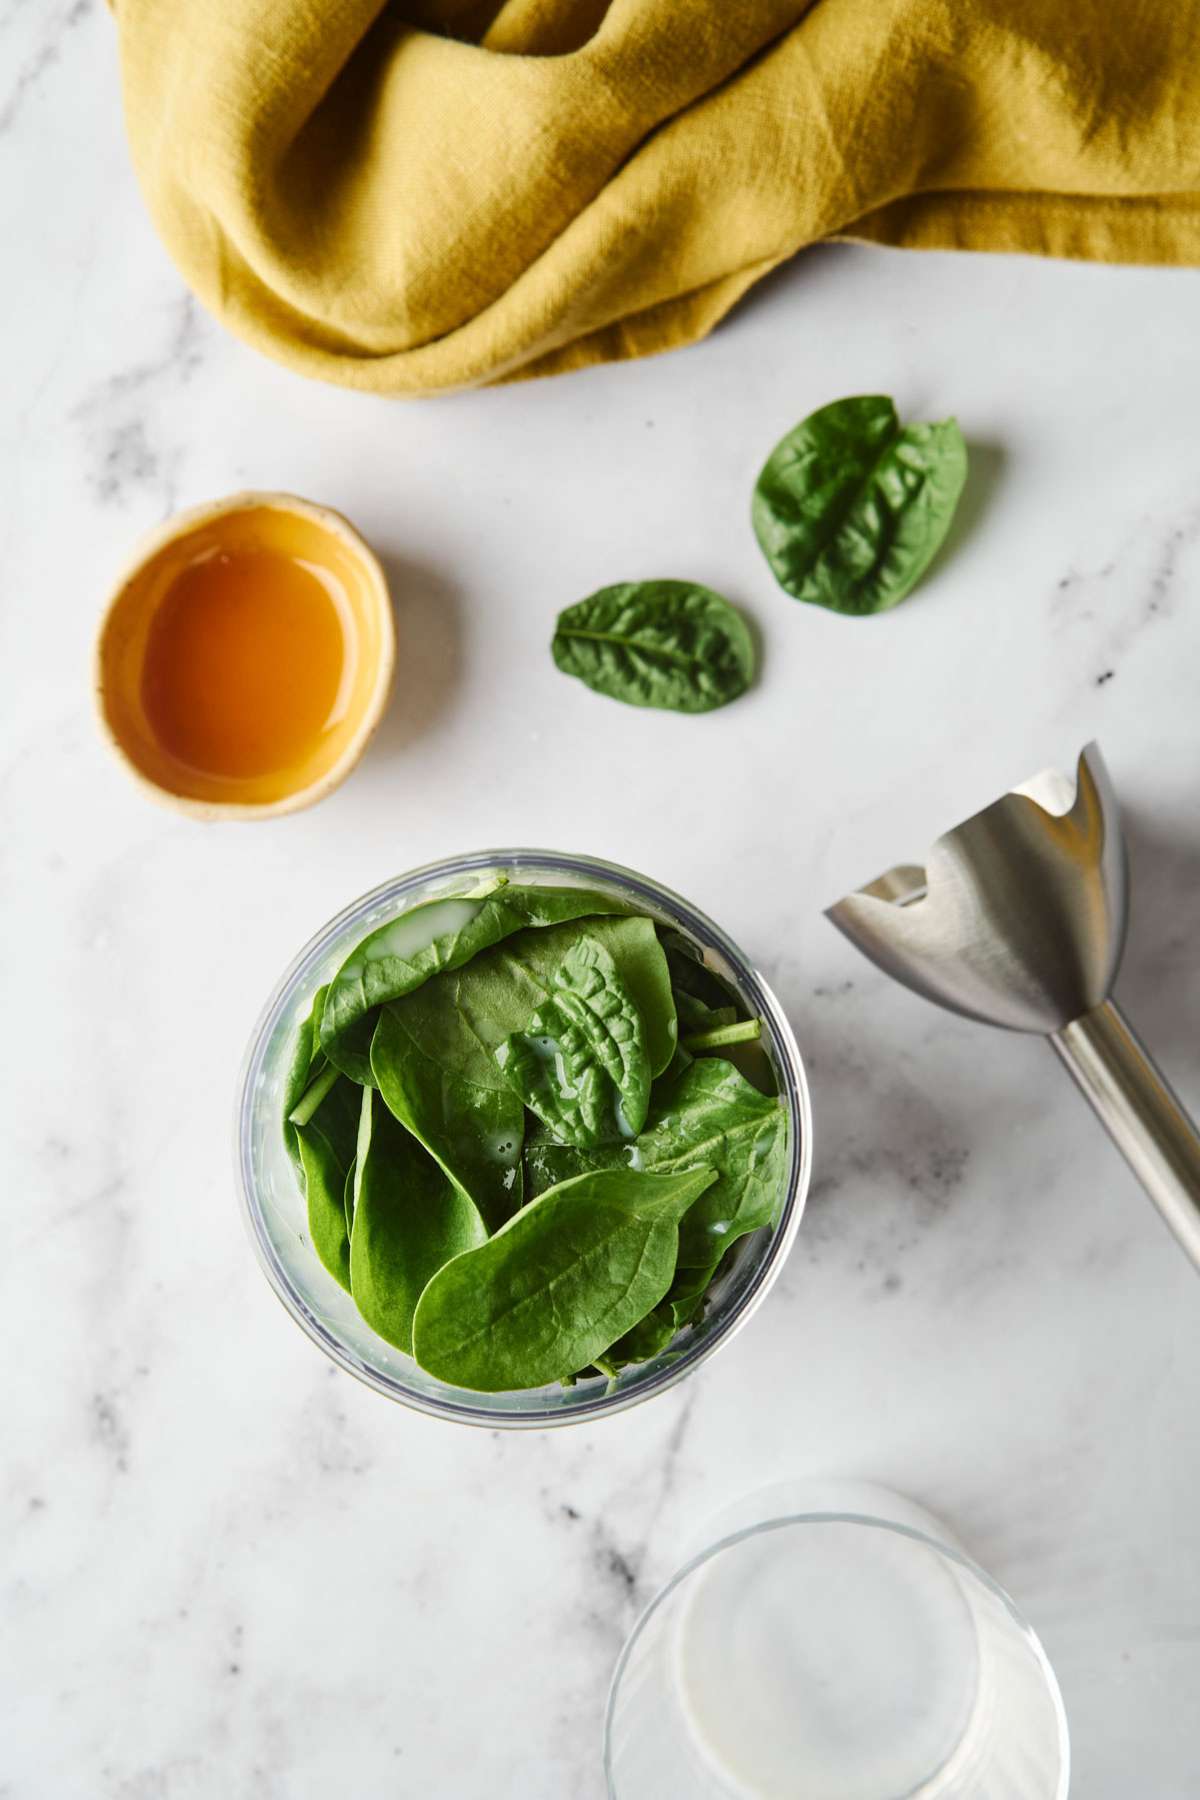 Spinach leaves added to a blender.